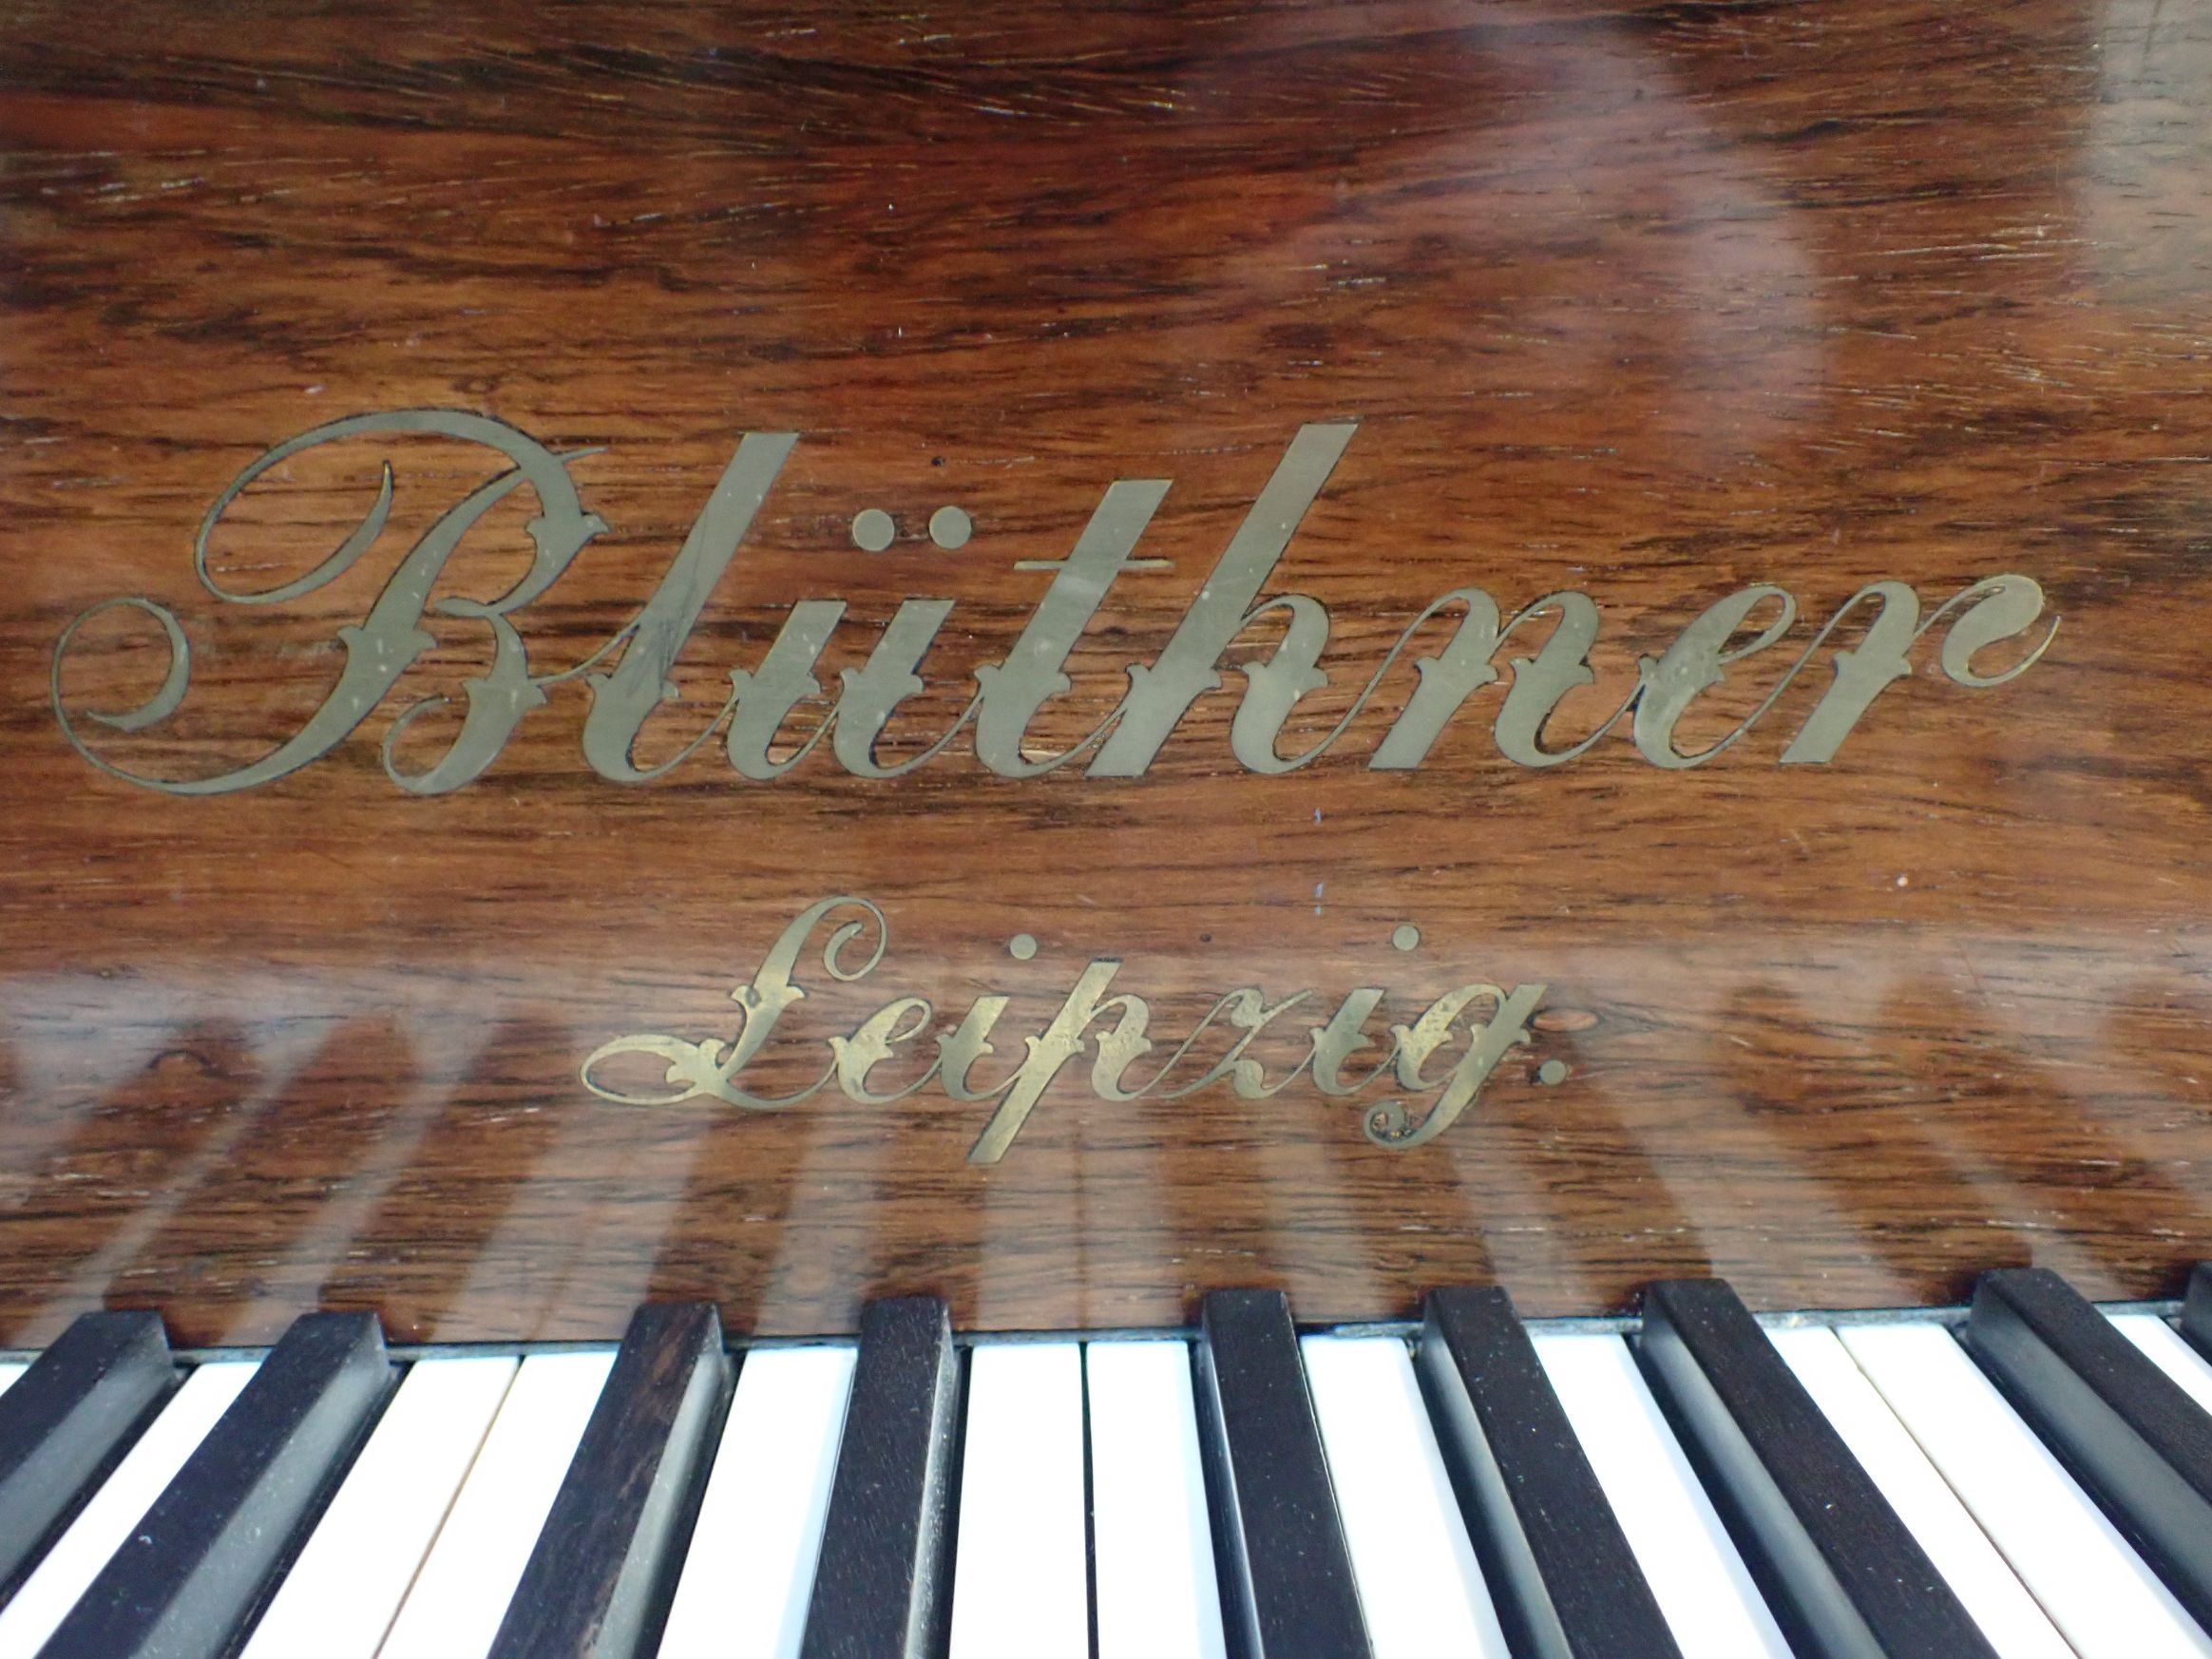 A BLUTHNER BOUDOIR GRAND PIANO - Image 6 of 6